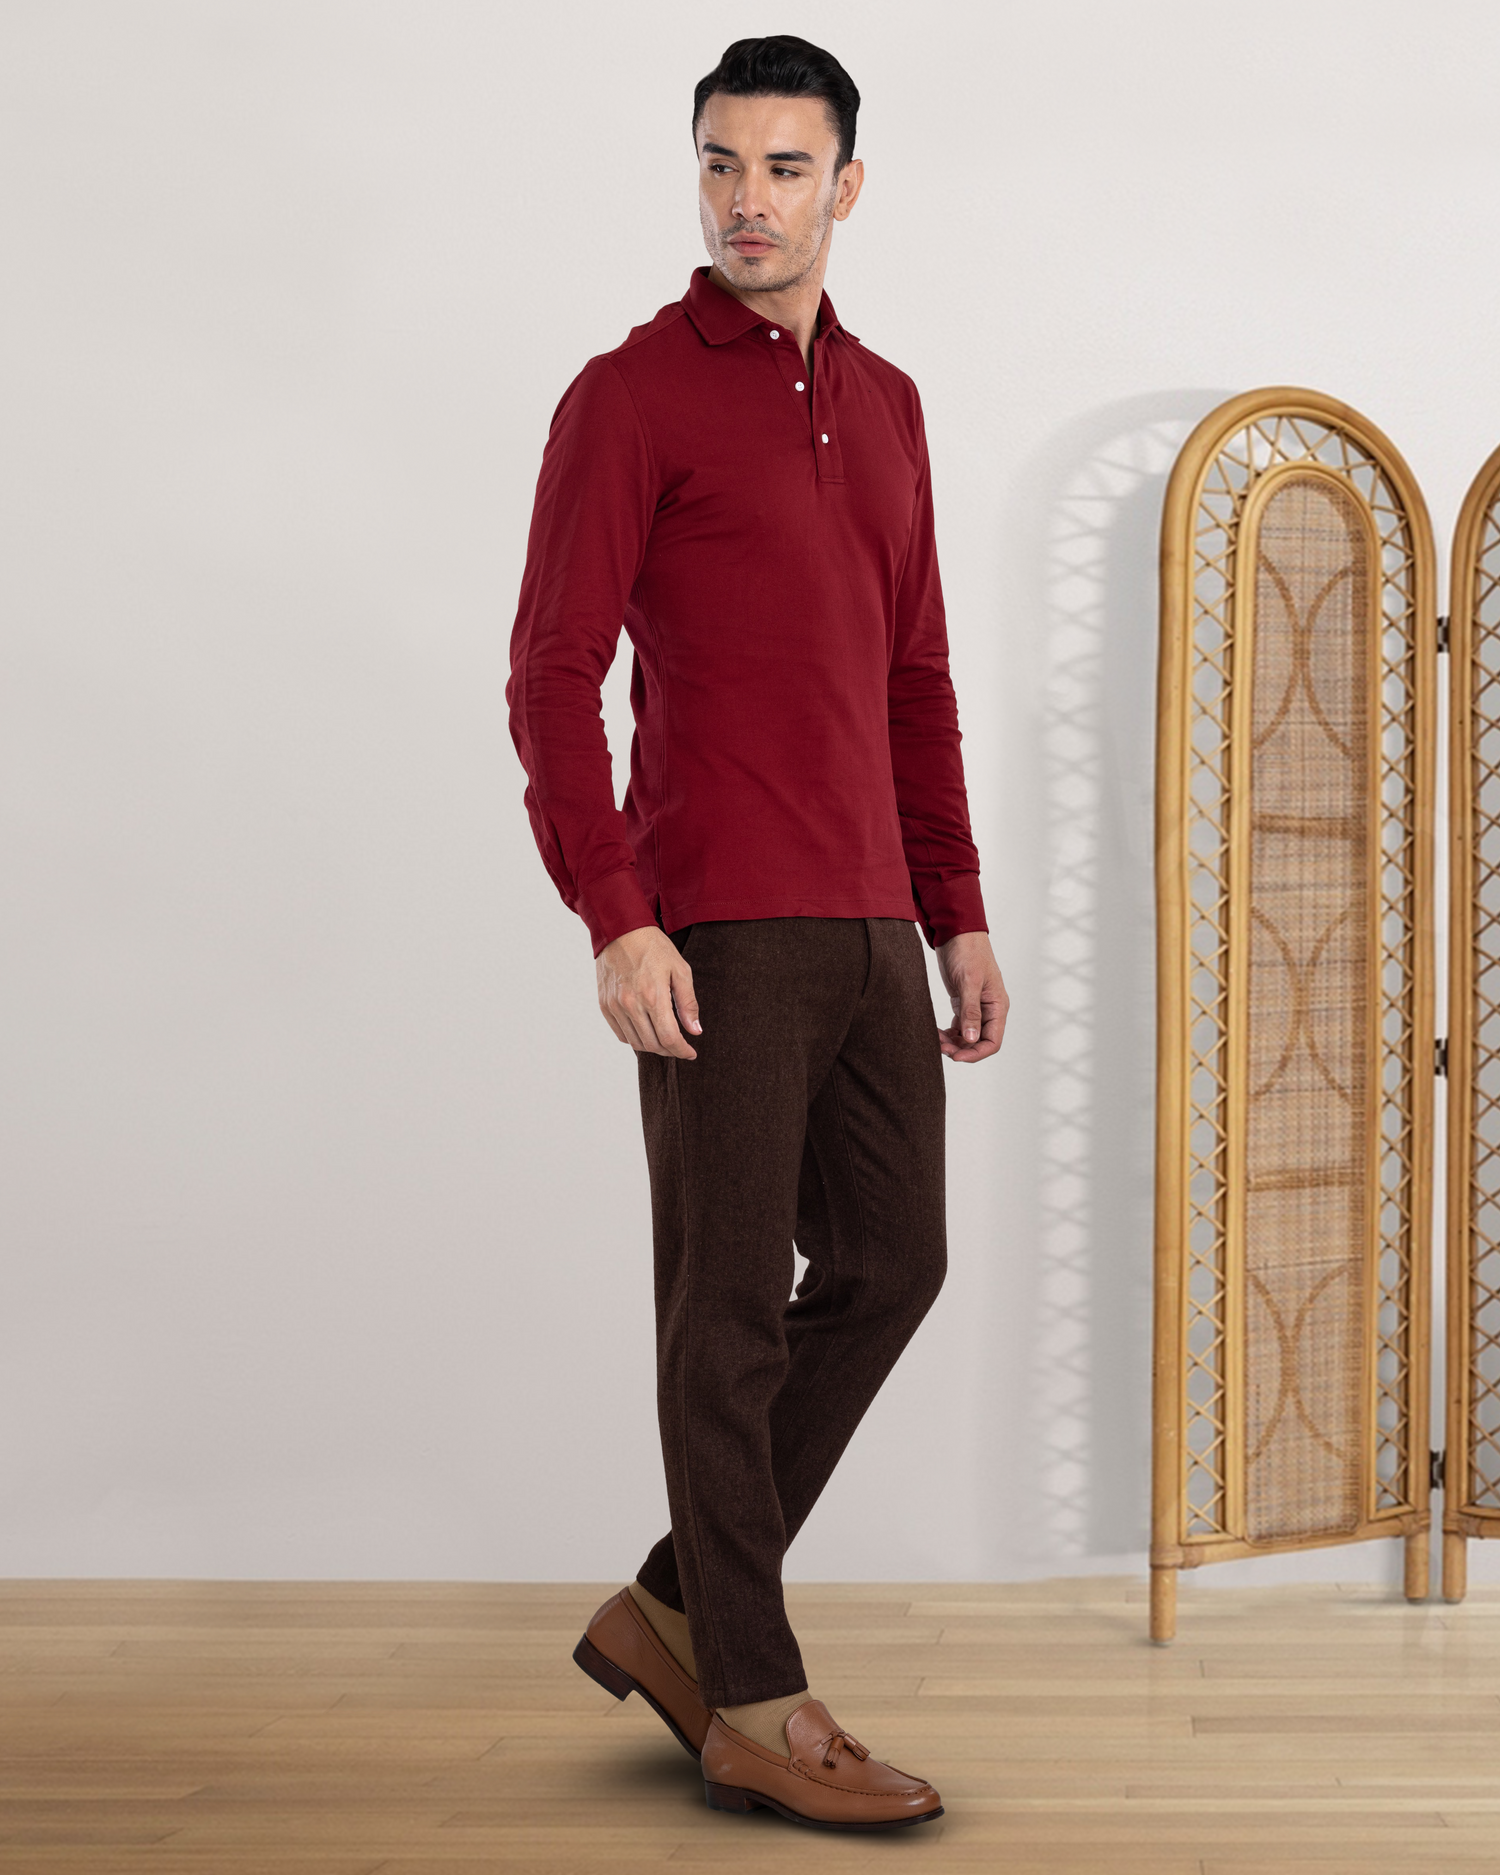 Side view of model wearing the custom oxford polo shirt for men by Luxire in maroon